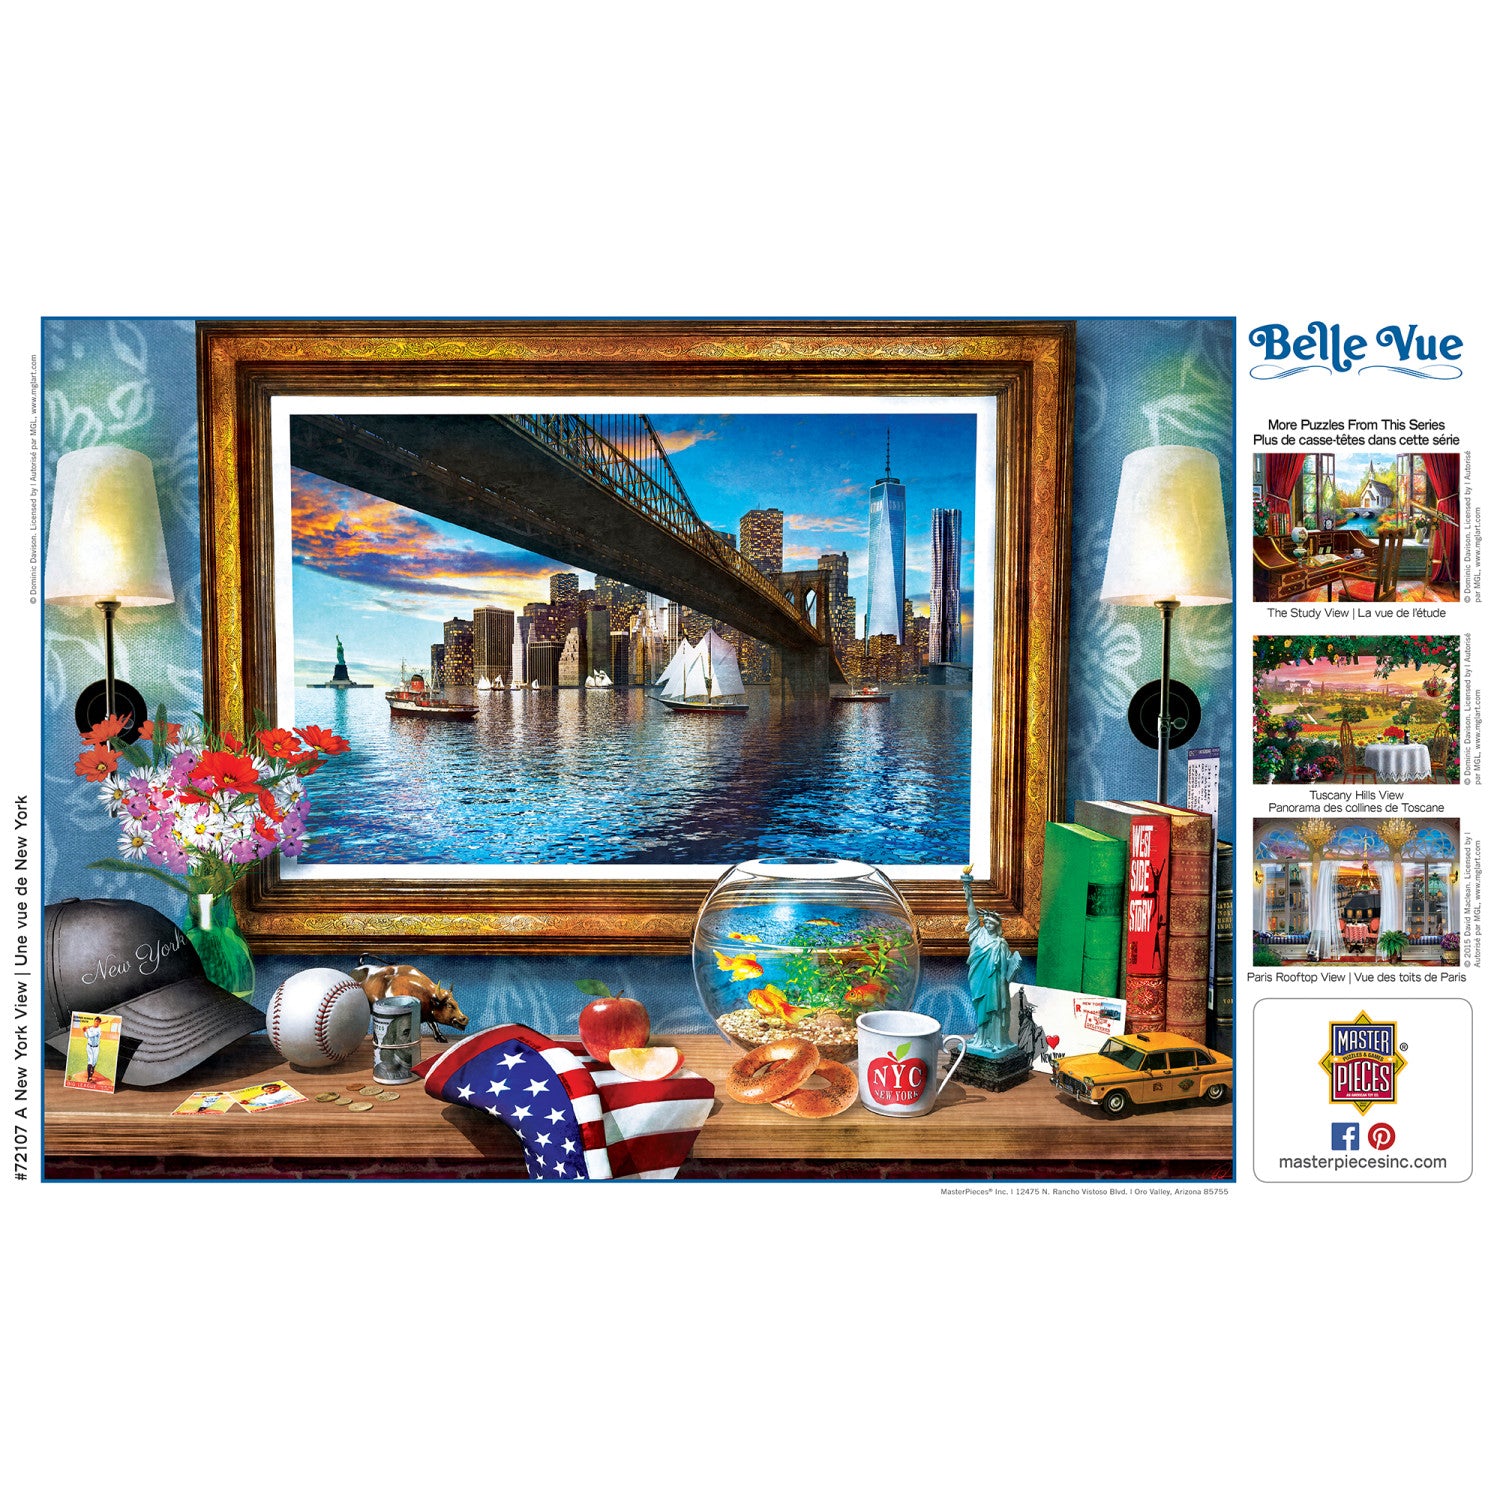 Belle Vue - A New York View 1000 Piece Jigsaw Puzzle